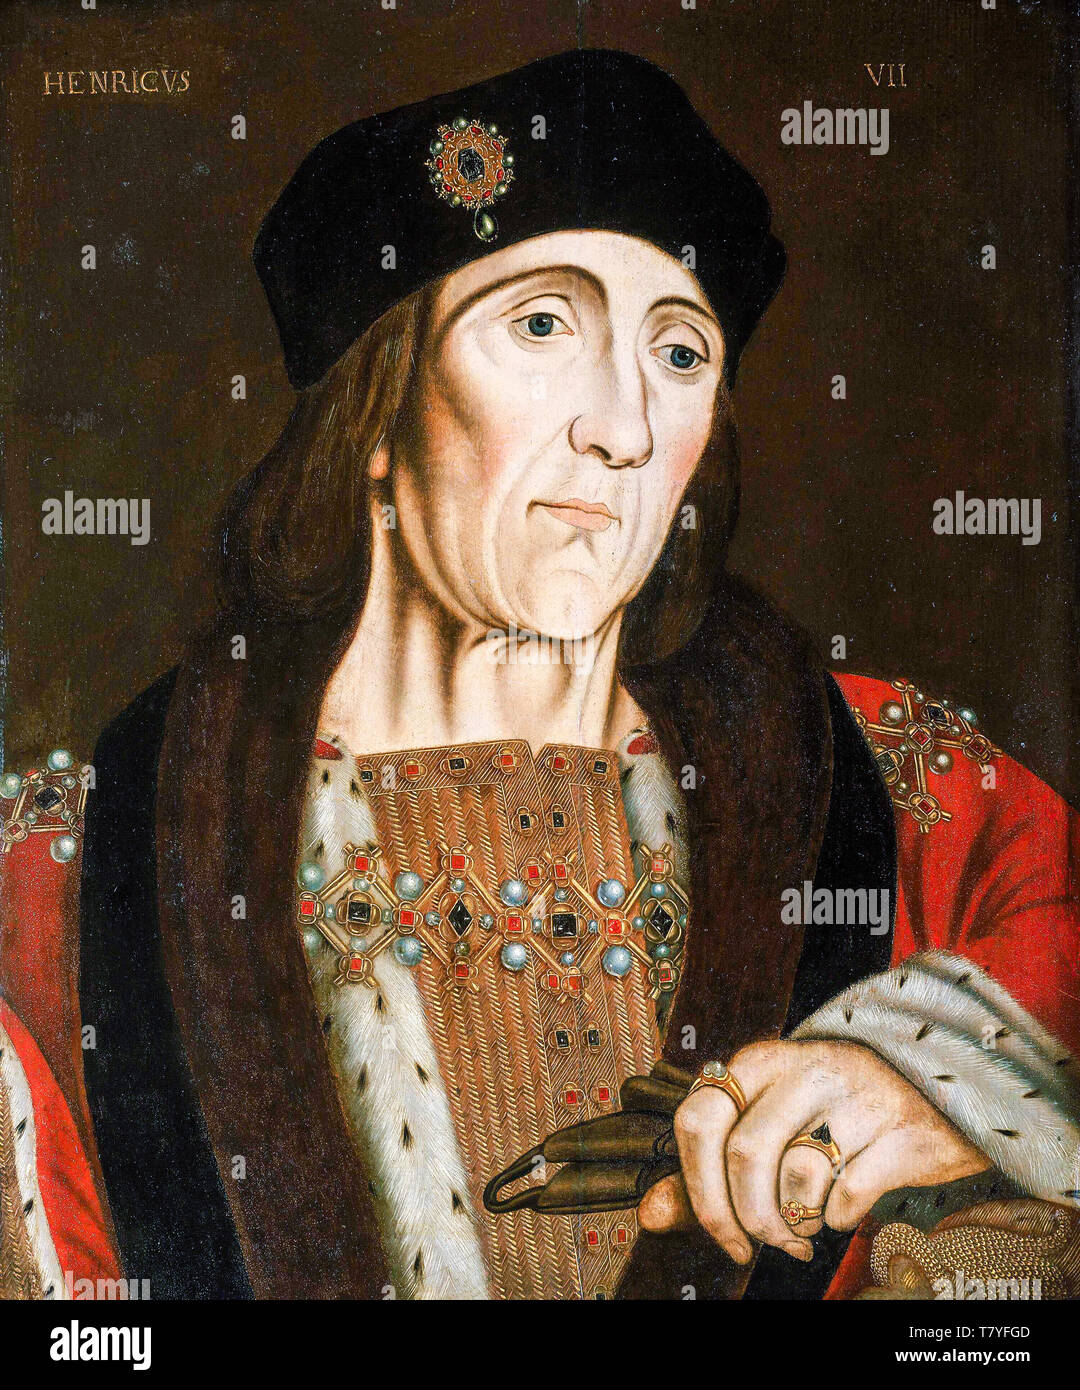 Henry VII of England, (1457-1509), King of England (1485-1509), portrait painting, circa 1505 Stock Photo